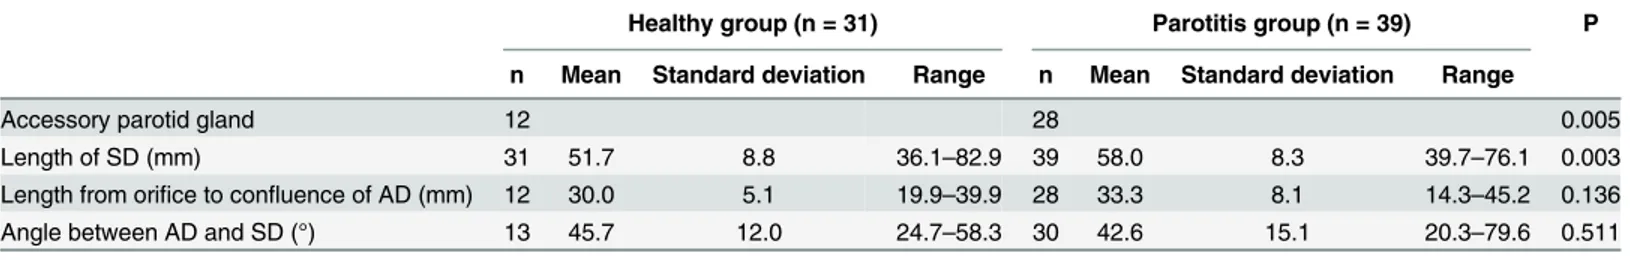 Table 1 shows the results in detail as means, standard deviations, and ranges.